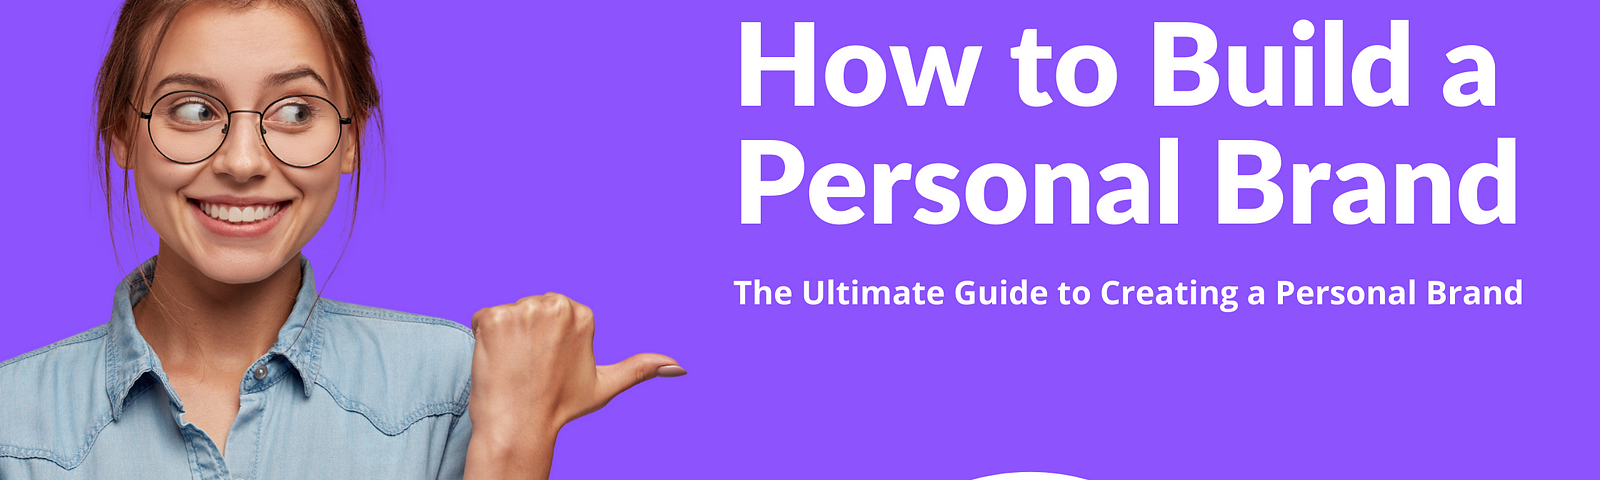 building a personal brand, building your personal brand, creating your personal brand, how to build a personal brand, how to build a personal brand website, the complete guide to building your personal brand, how to build a personal brand on social media